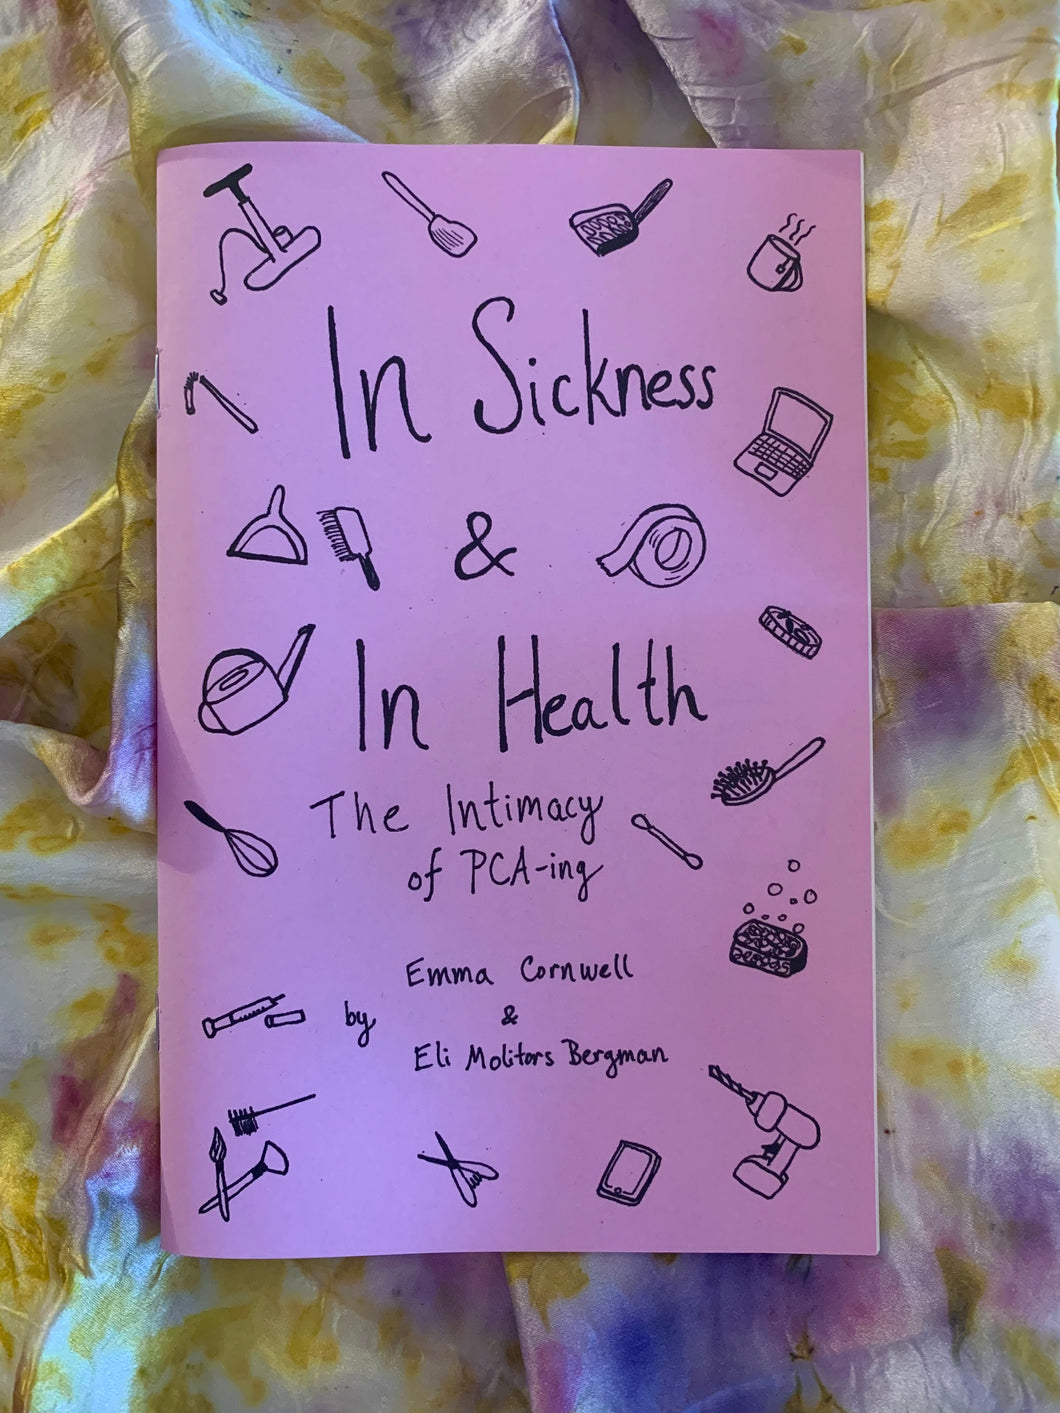 In Sickness & In Health: The Intimacy of PCA-ing zine